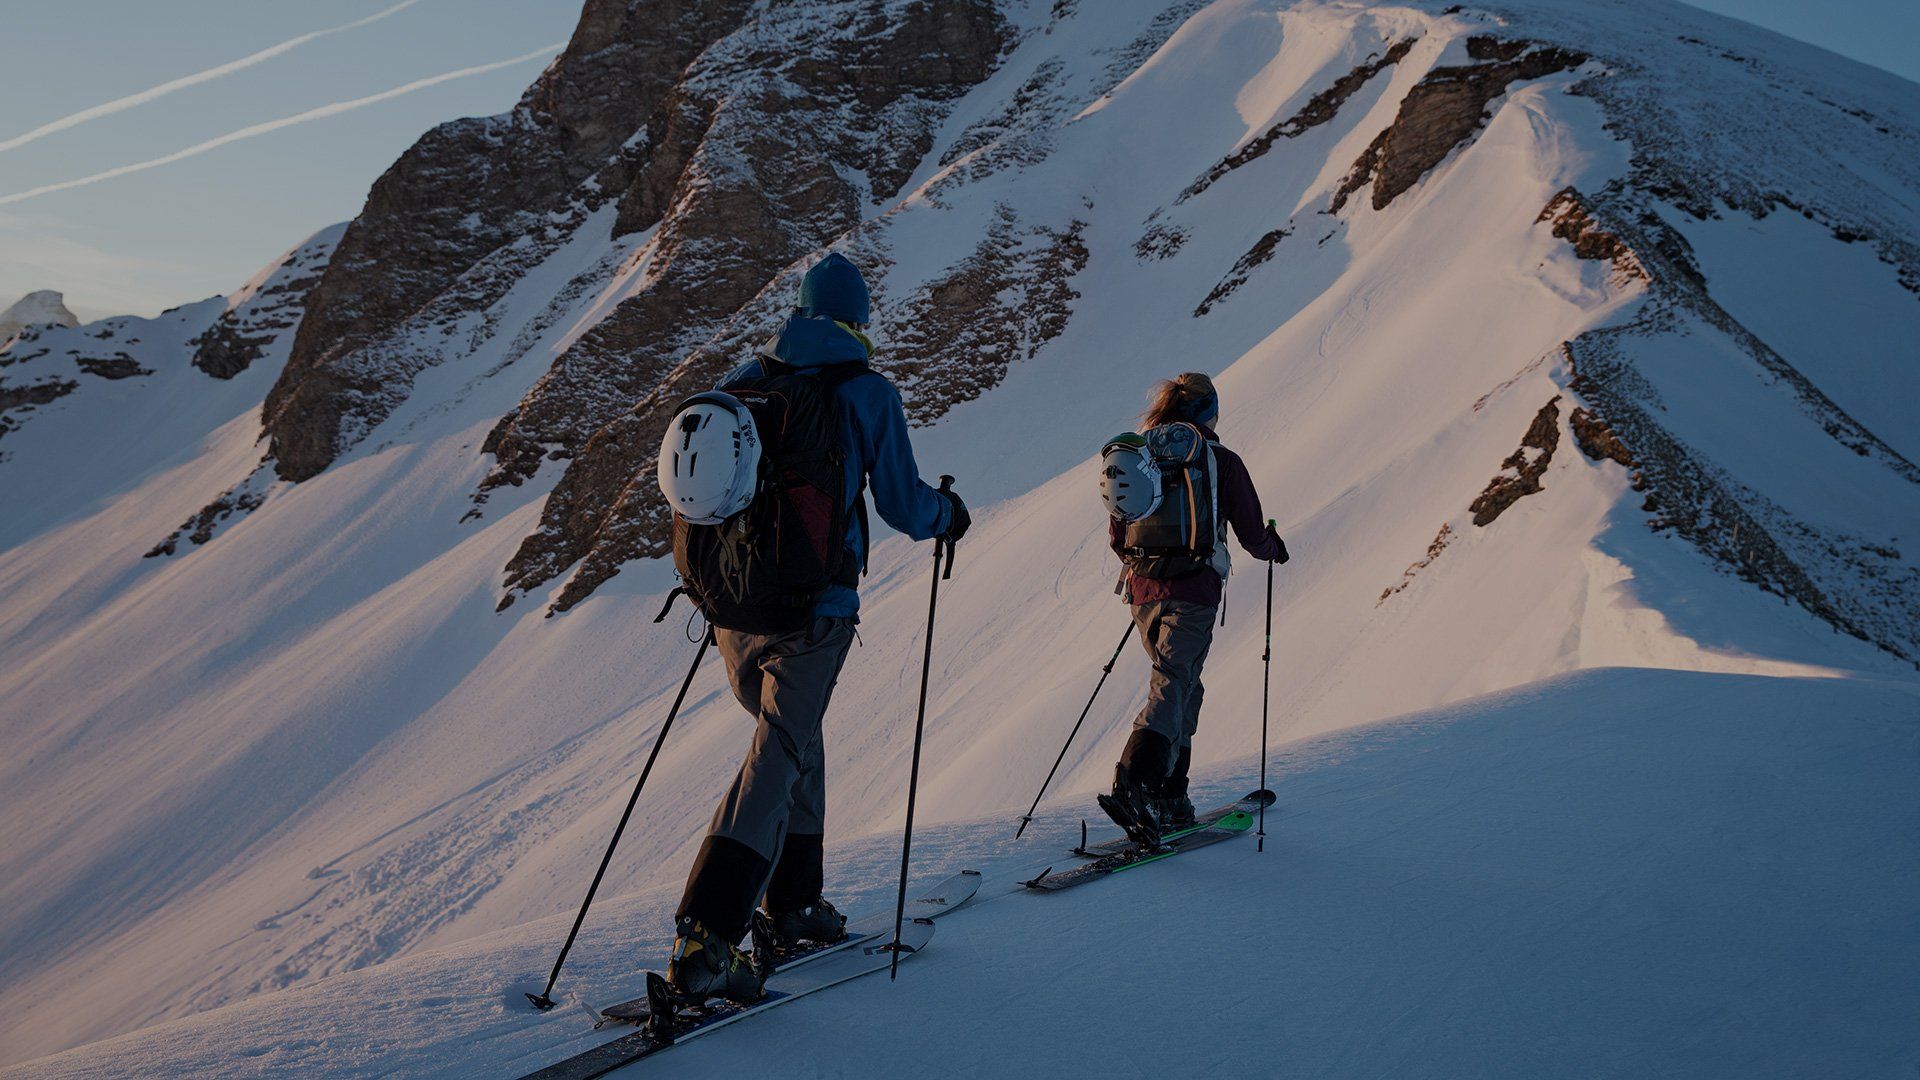 Two cross-country skiers travel along the narrow spine of a mountain, using their poles.